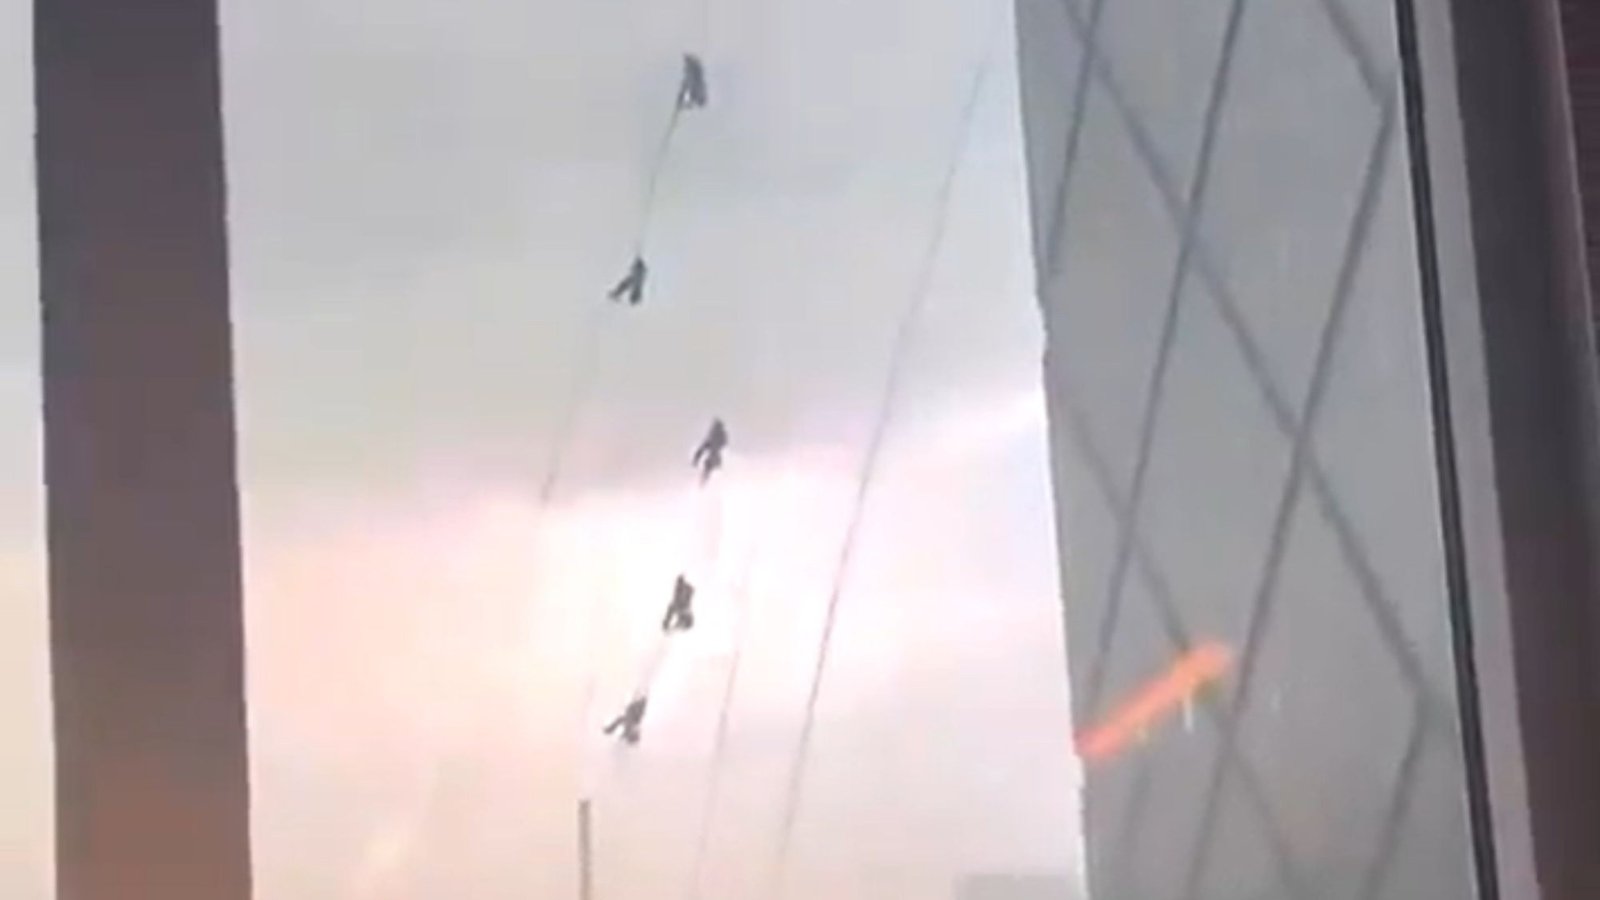 Terrifying moment window cleaners cling on for their lives swinging from 51 storey building as theyre battered by storm